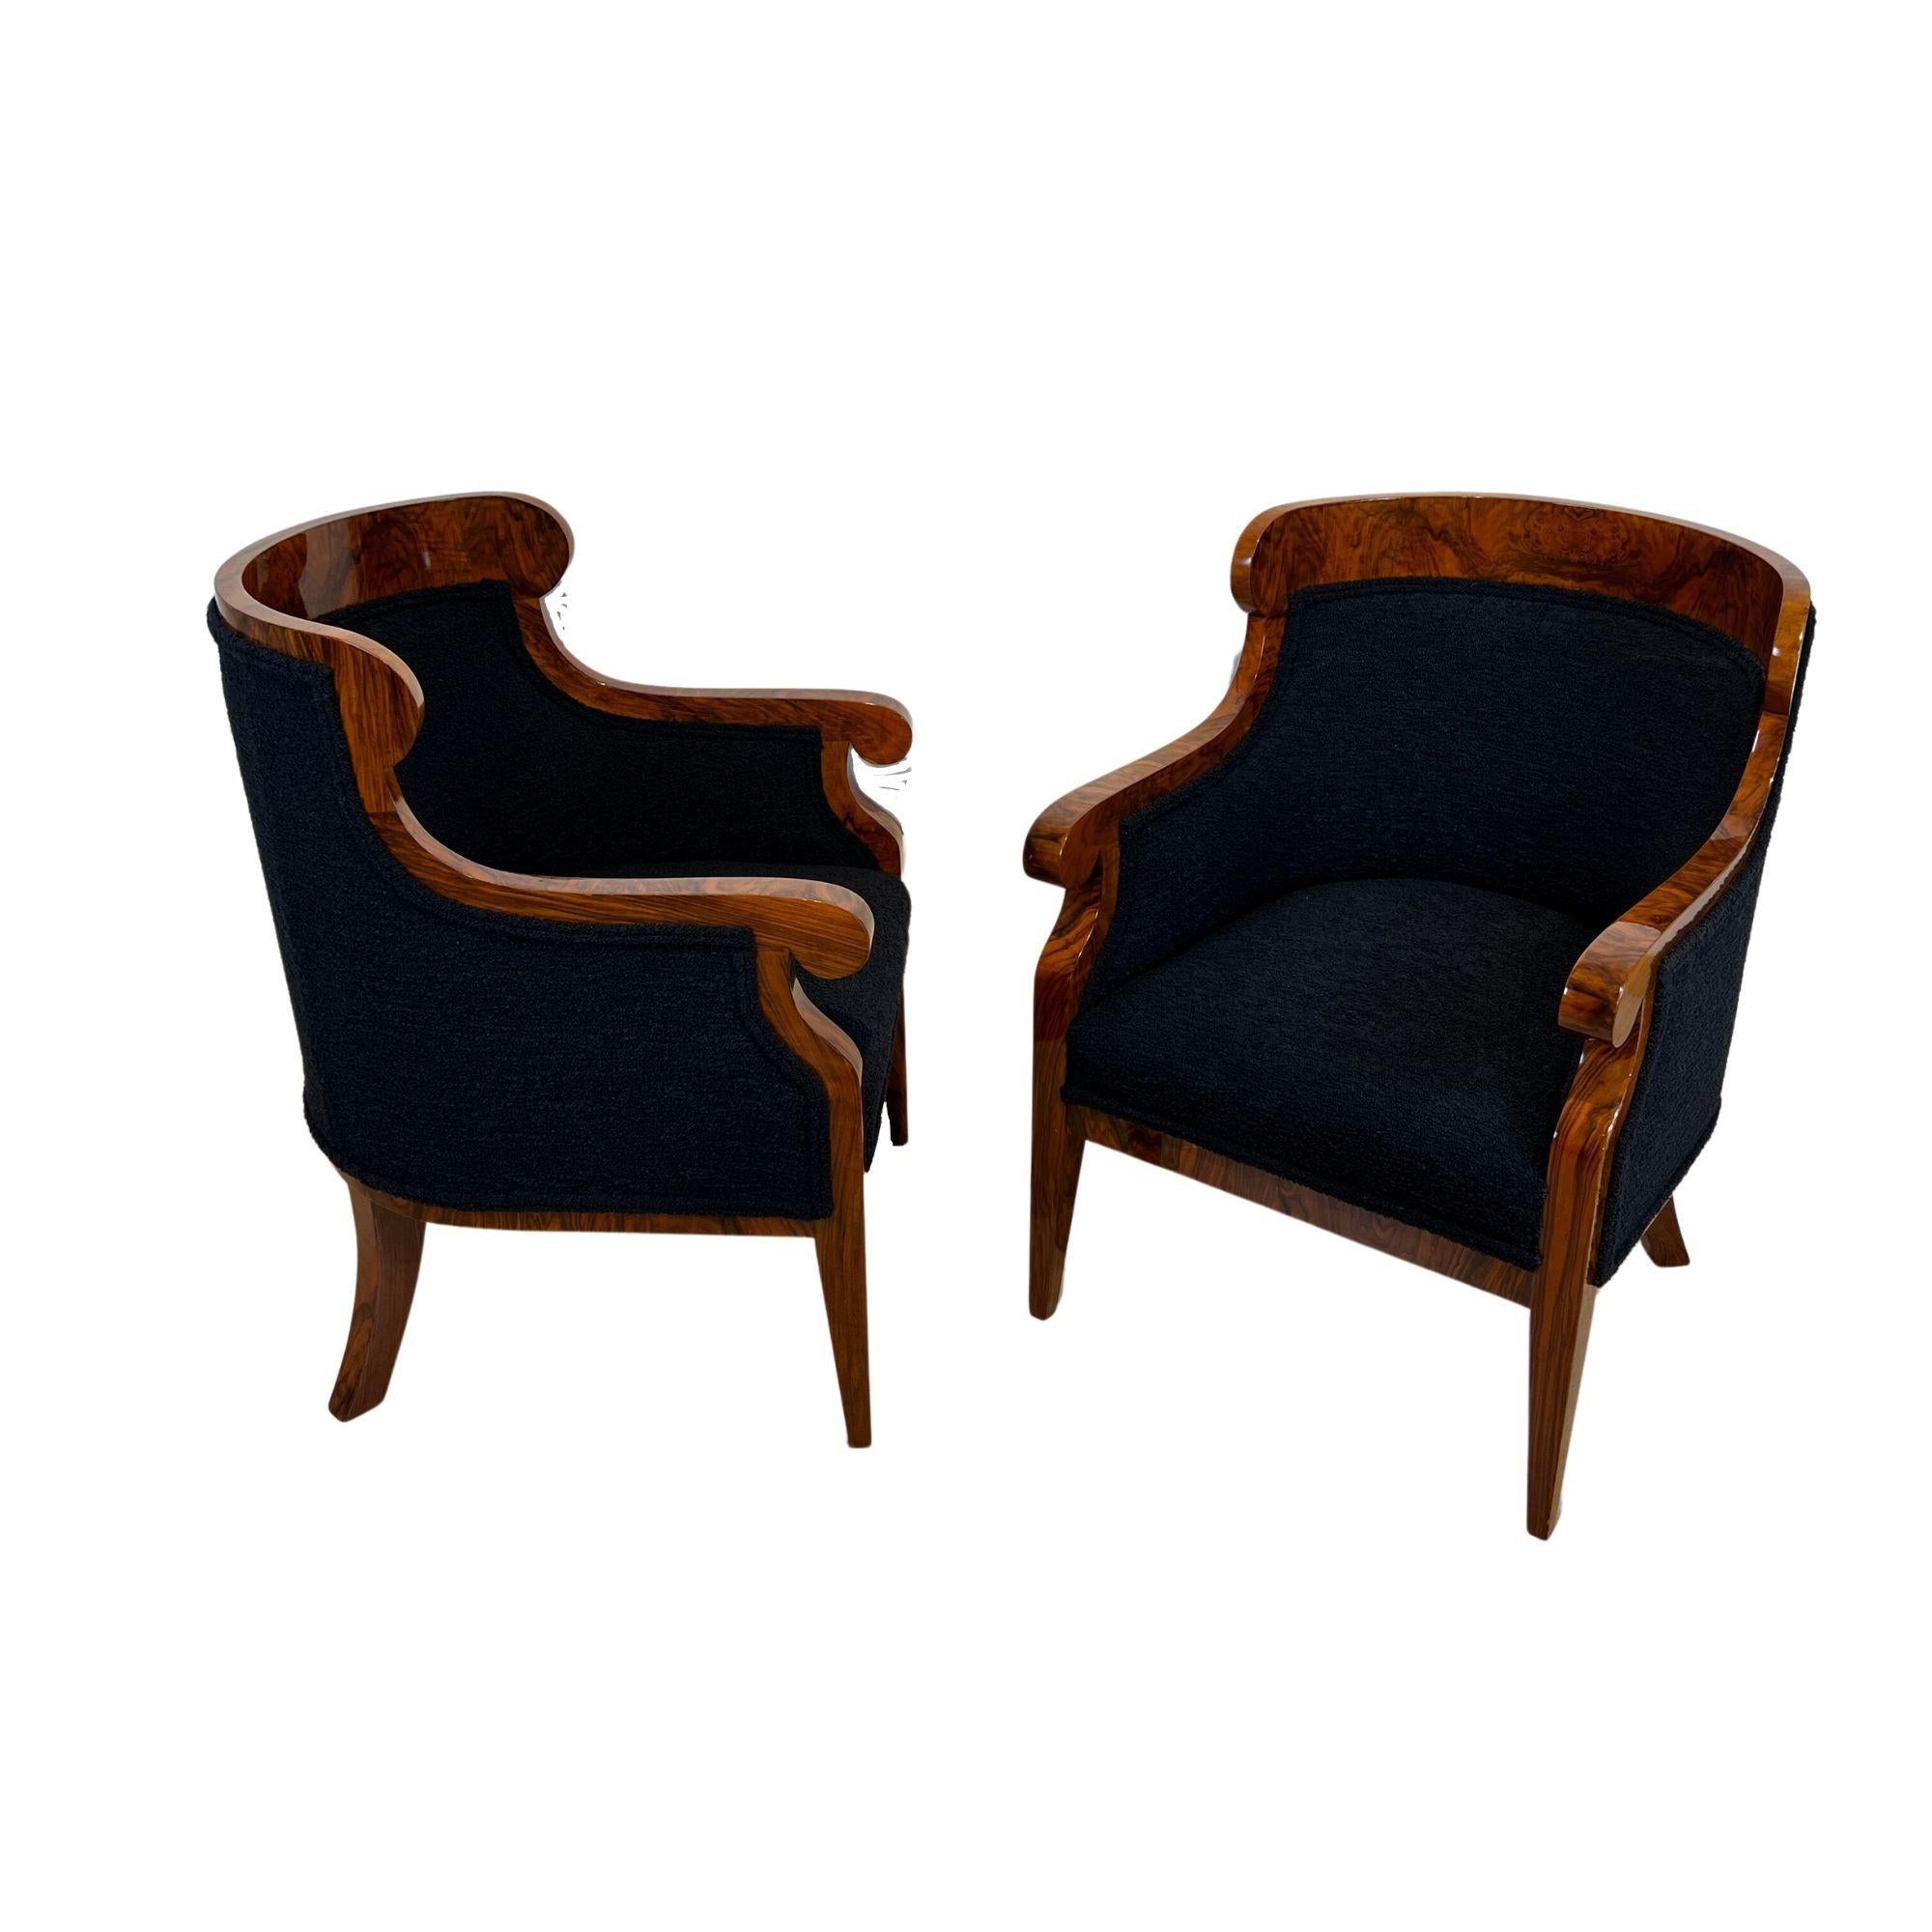 Elegant Pair of neoclassical Biedermeier Bergere chairs from Austria, Vienna circa 1850.
Walnut veneered on softwood and solid walnut wood.
Conical square-tapered legs. Restored condition and shellac hand-polished.
Newly upholstered in black 